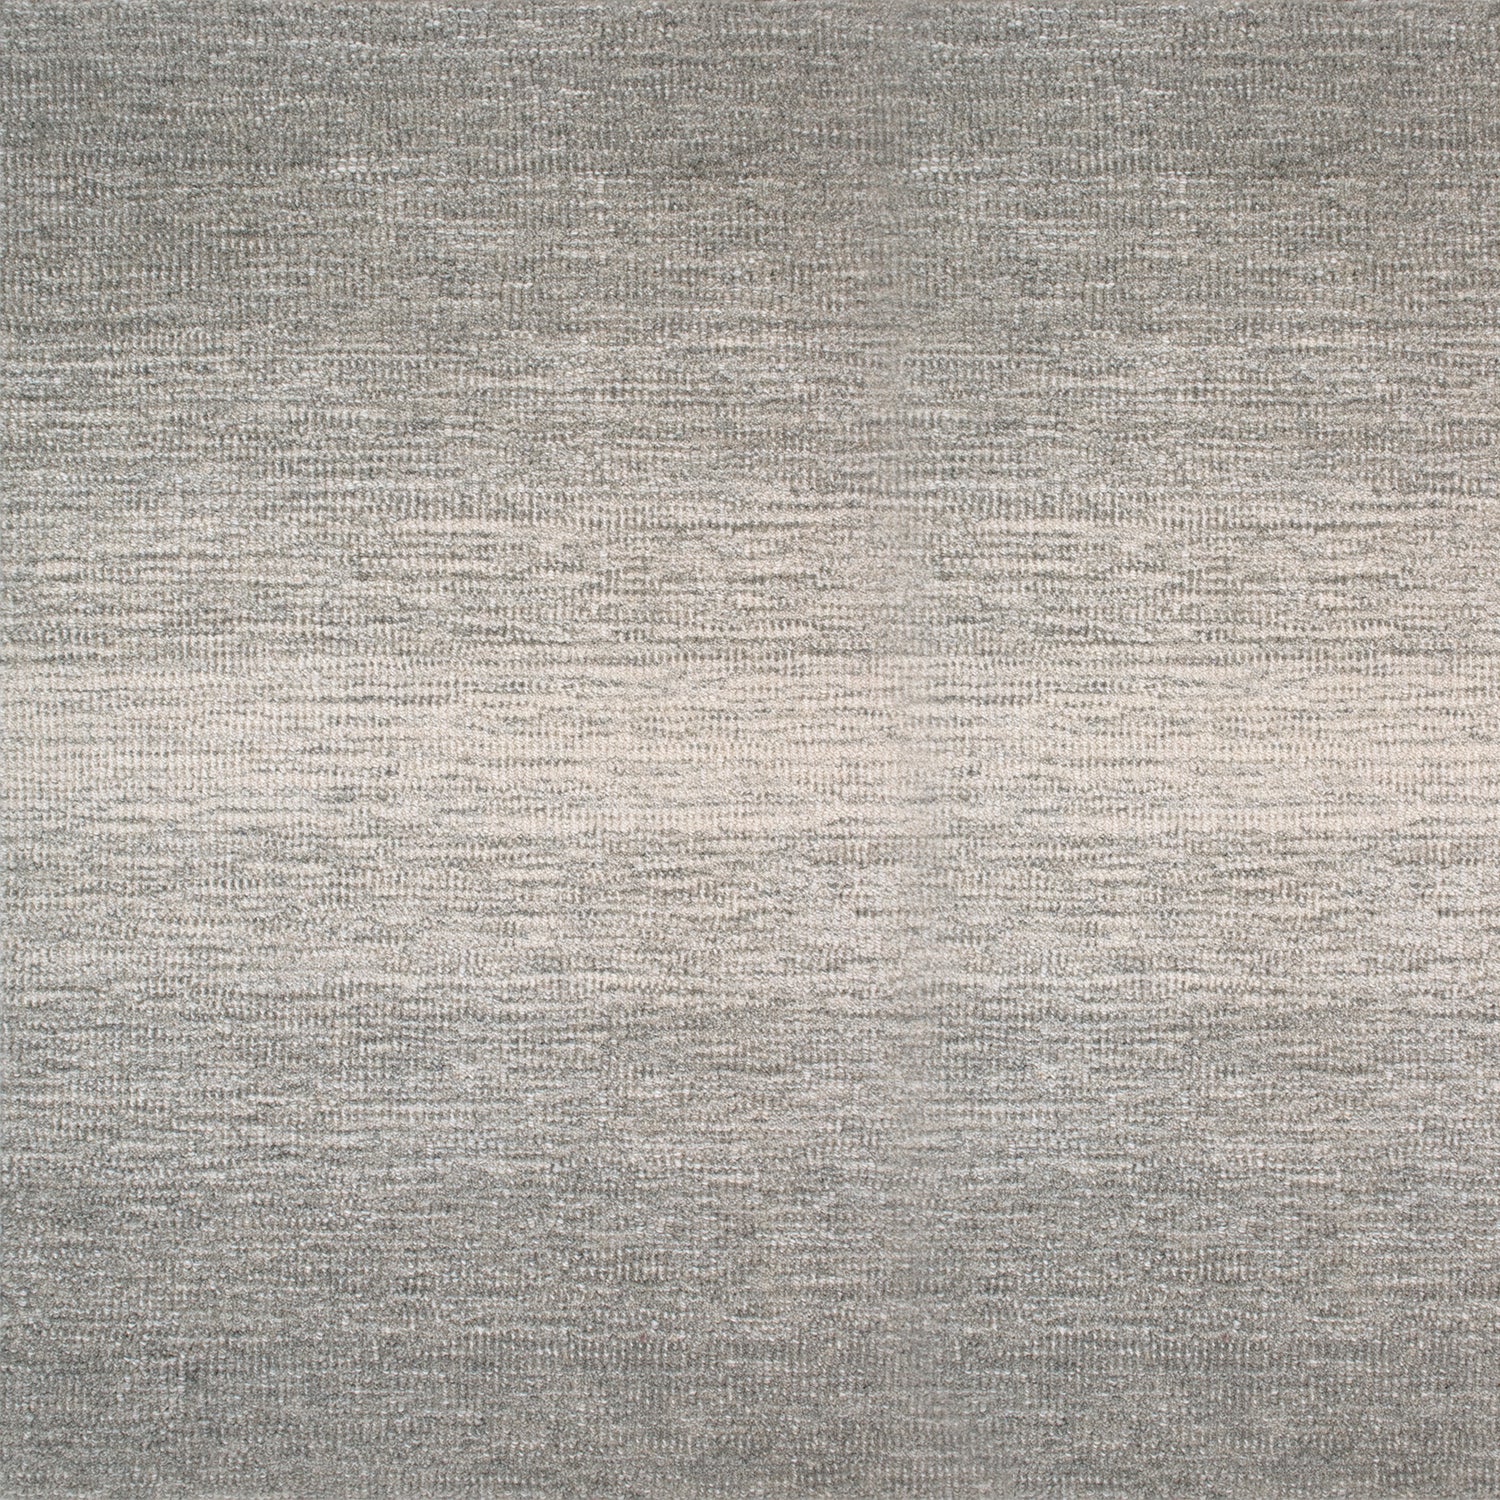 Wool broadloom carpet swatch in an ombré weave in shades of cream and gray.